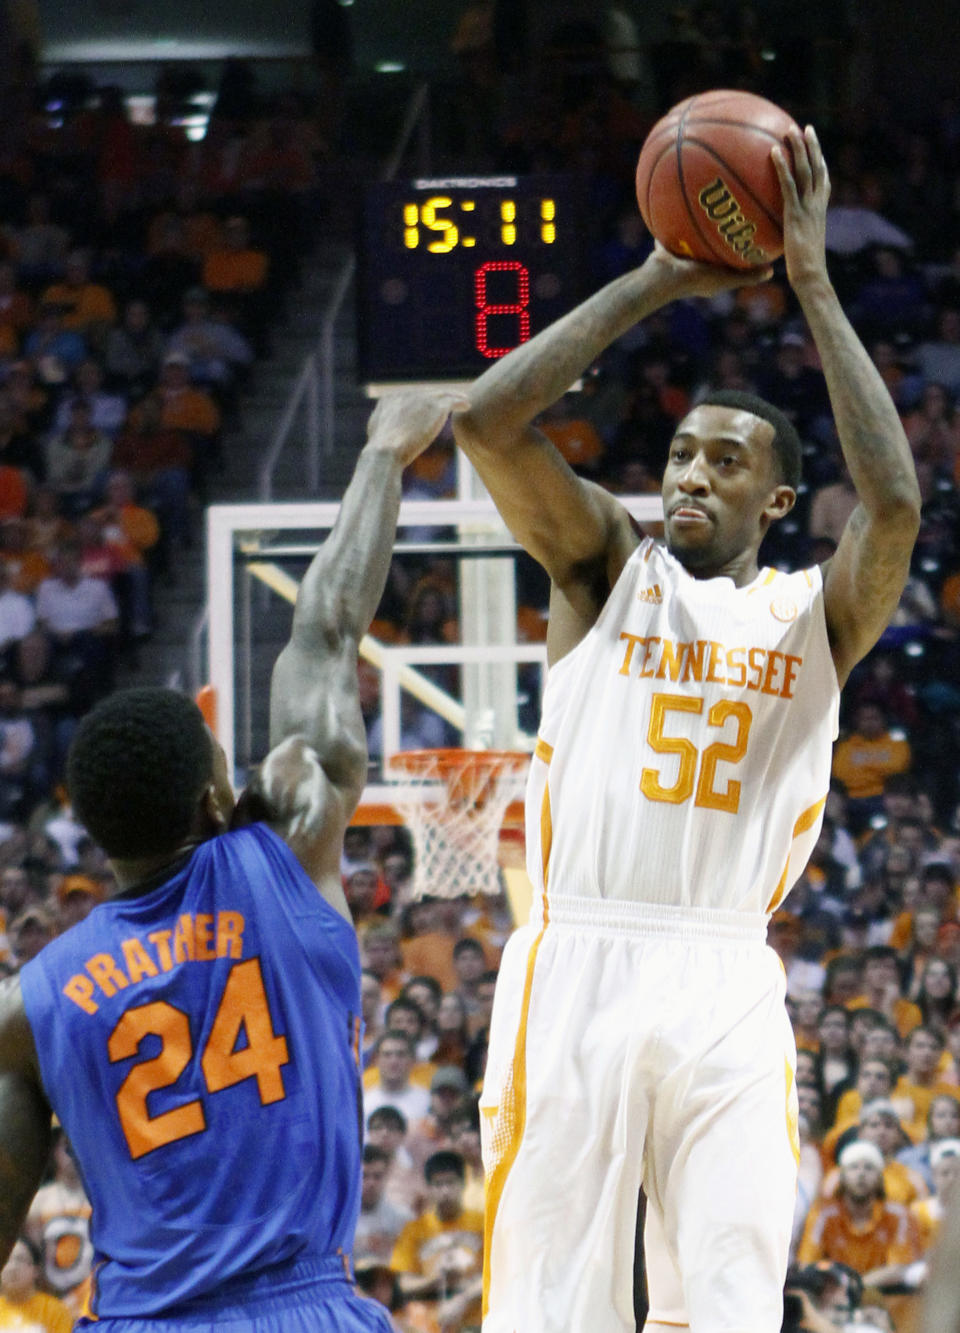 Tennessee guard Jordan McRae (52) shoots over Florida forward Casey Prather (24) in the first half of an NCAA college basketball game on Tuesday, Feb. 11, 2014, in Knoxville, Tenn. (AP Photo/Wade Payne)